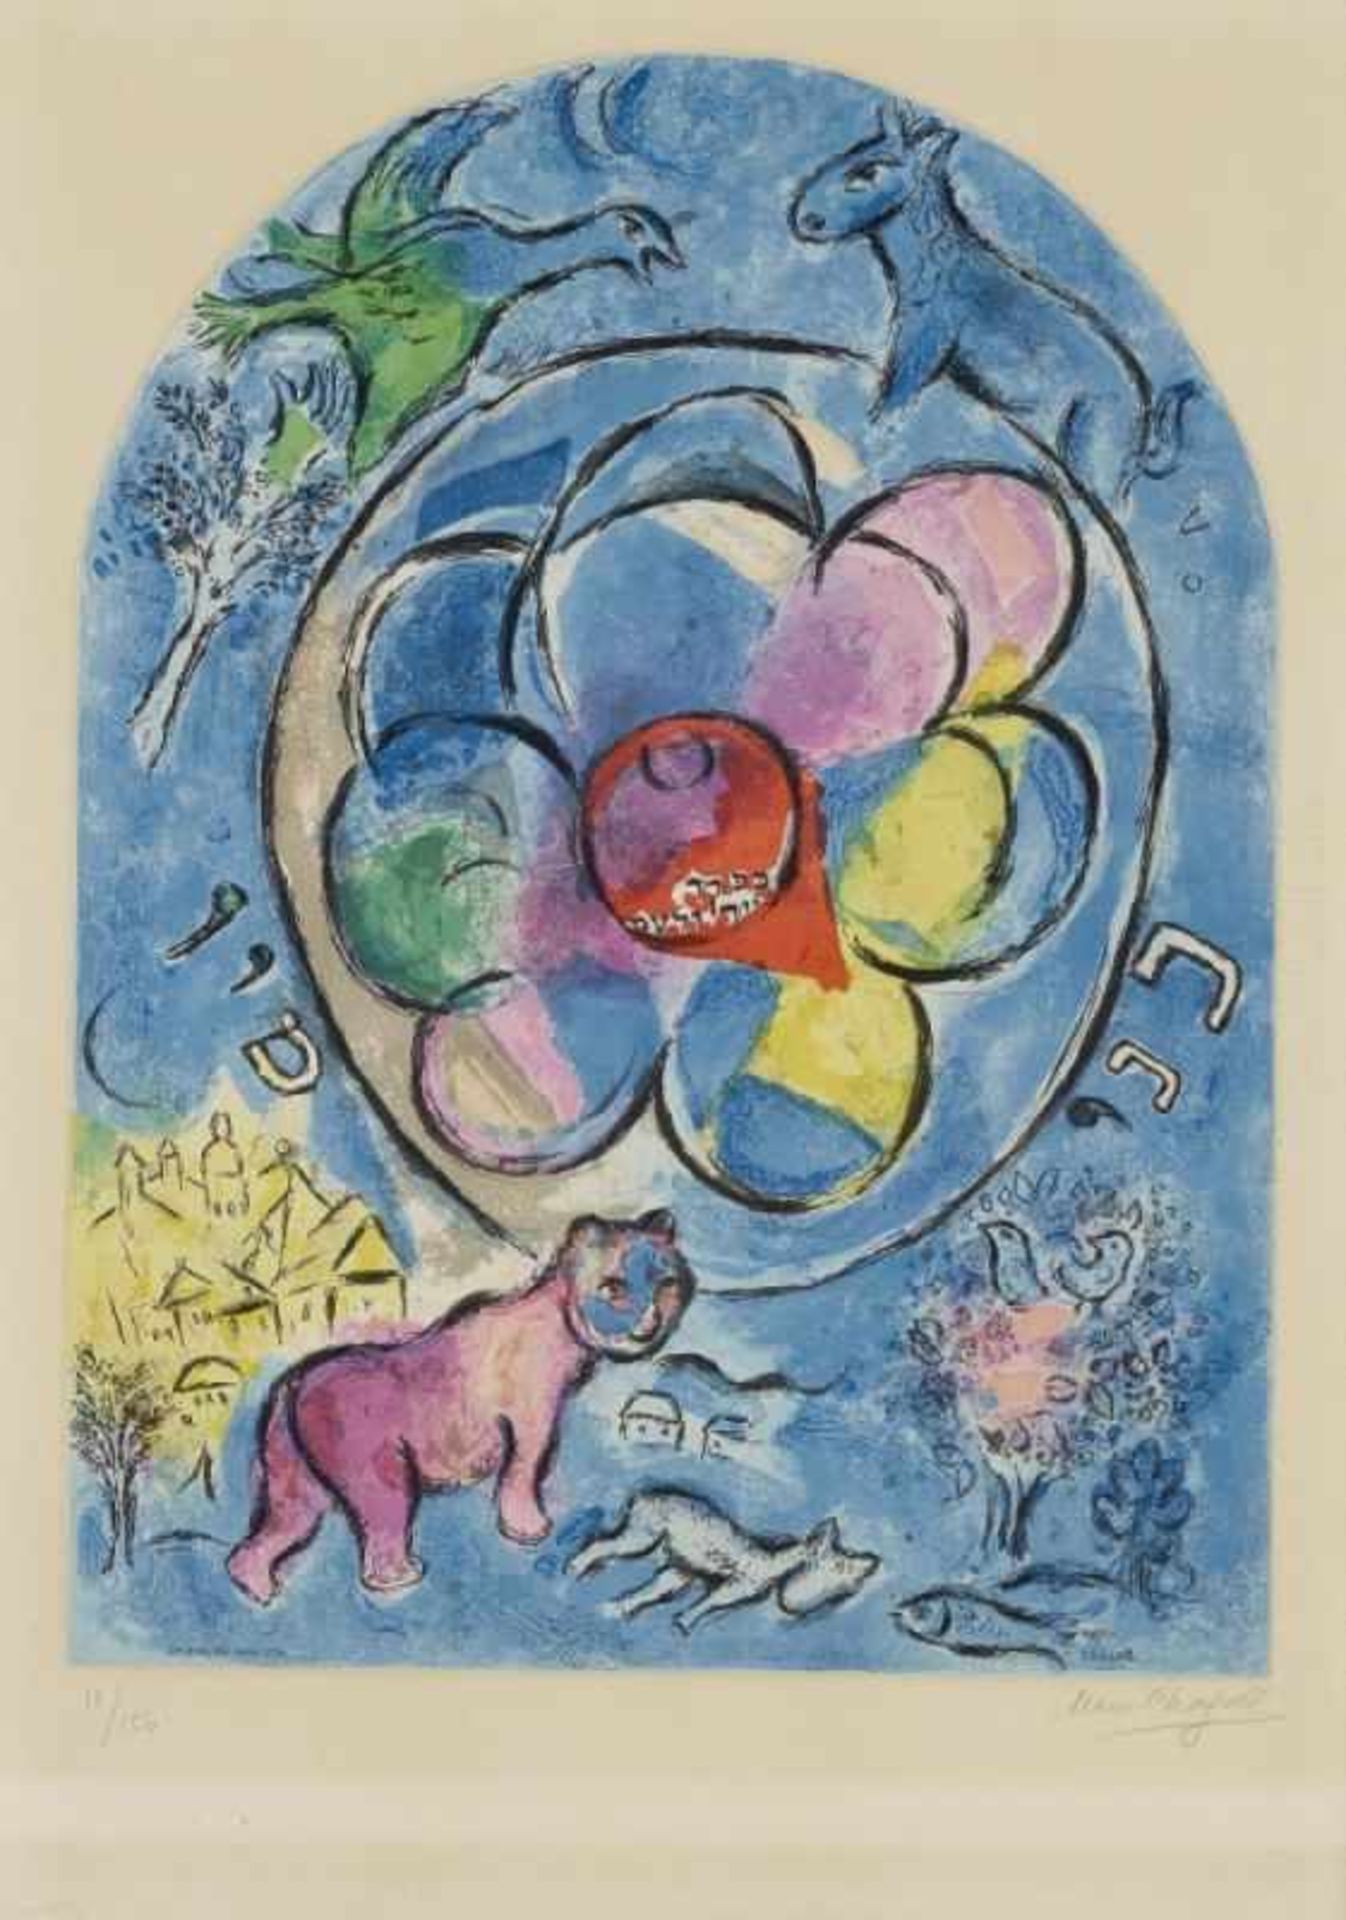 Chagall, Marc 1887 Witebsk - 1985 St. Paul de Vence, nach Le Tribu Benjamin. 1964 Farblithographie